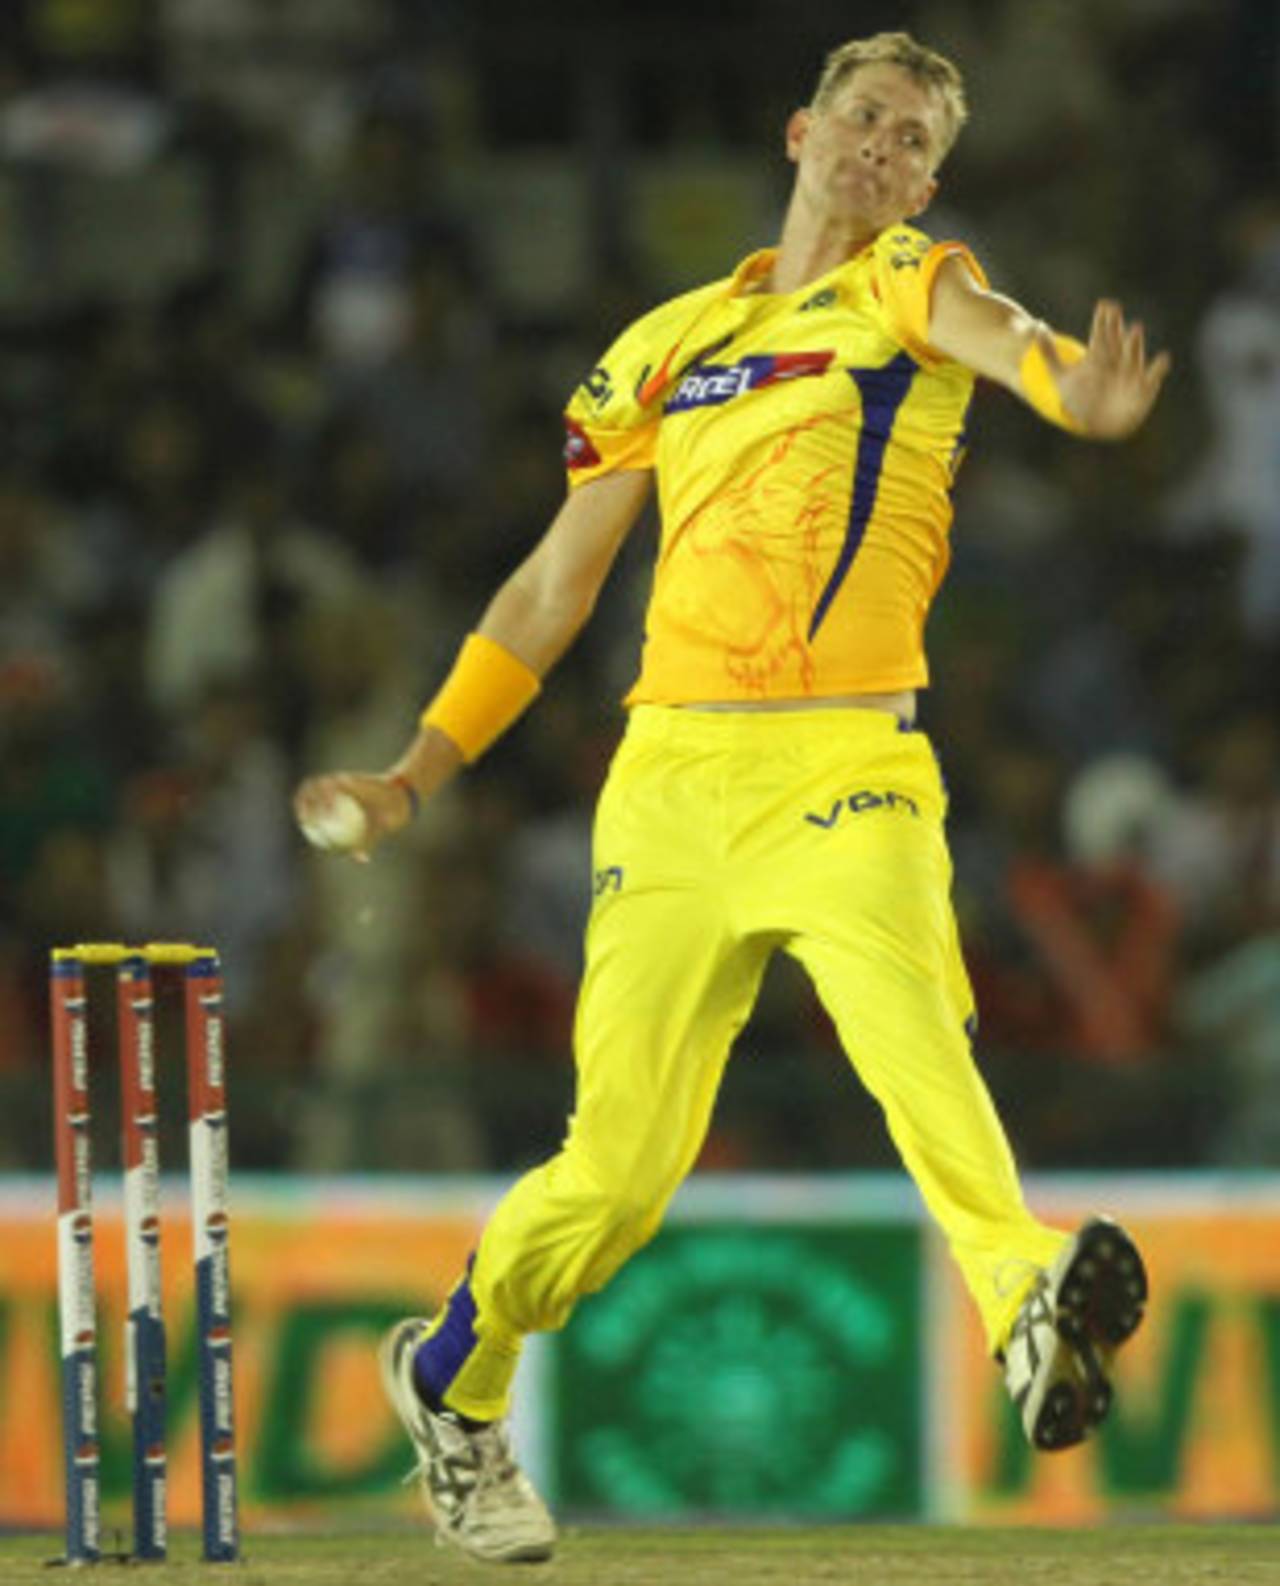 Chris Morris, who is coming off a solid showing in the IPL, will replace the injured Morne Morkel&nbsp;&nbsp;&bull;&nbsp;&nbsp;BCCI